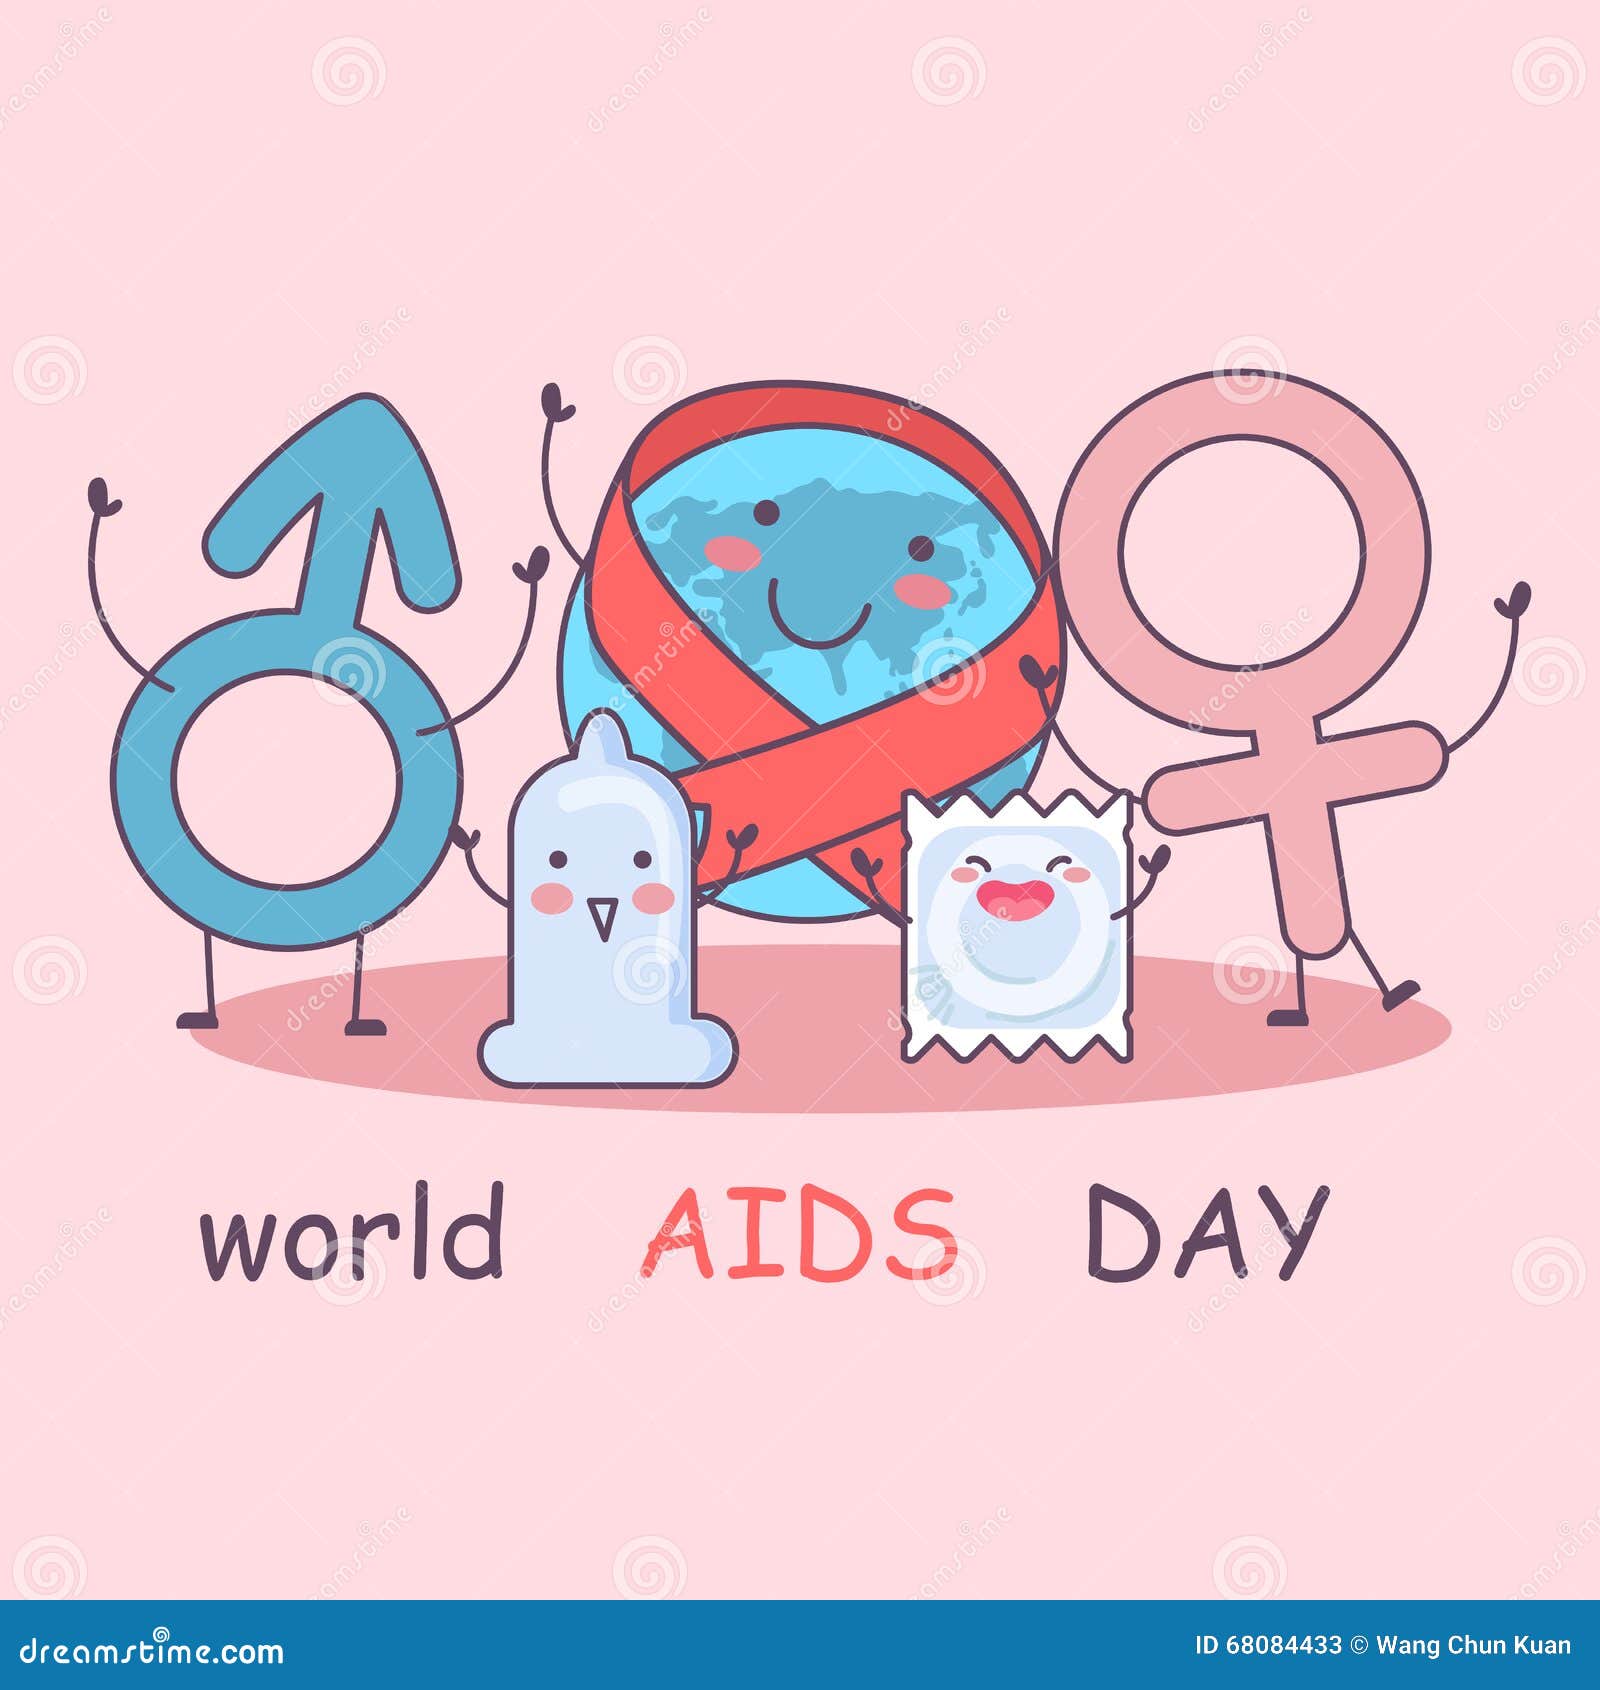 World Aids Day With Condom Stock Vector Illustration Of Cartoon 68084433